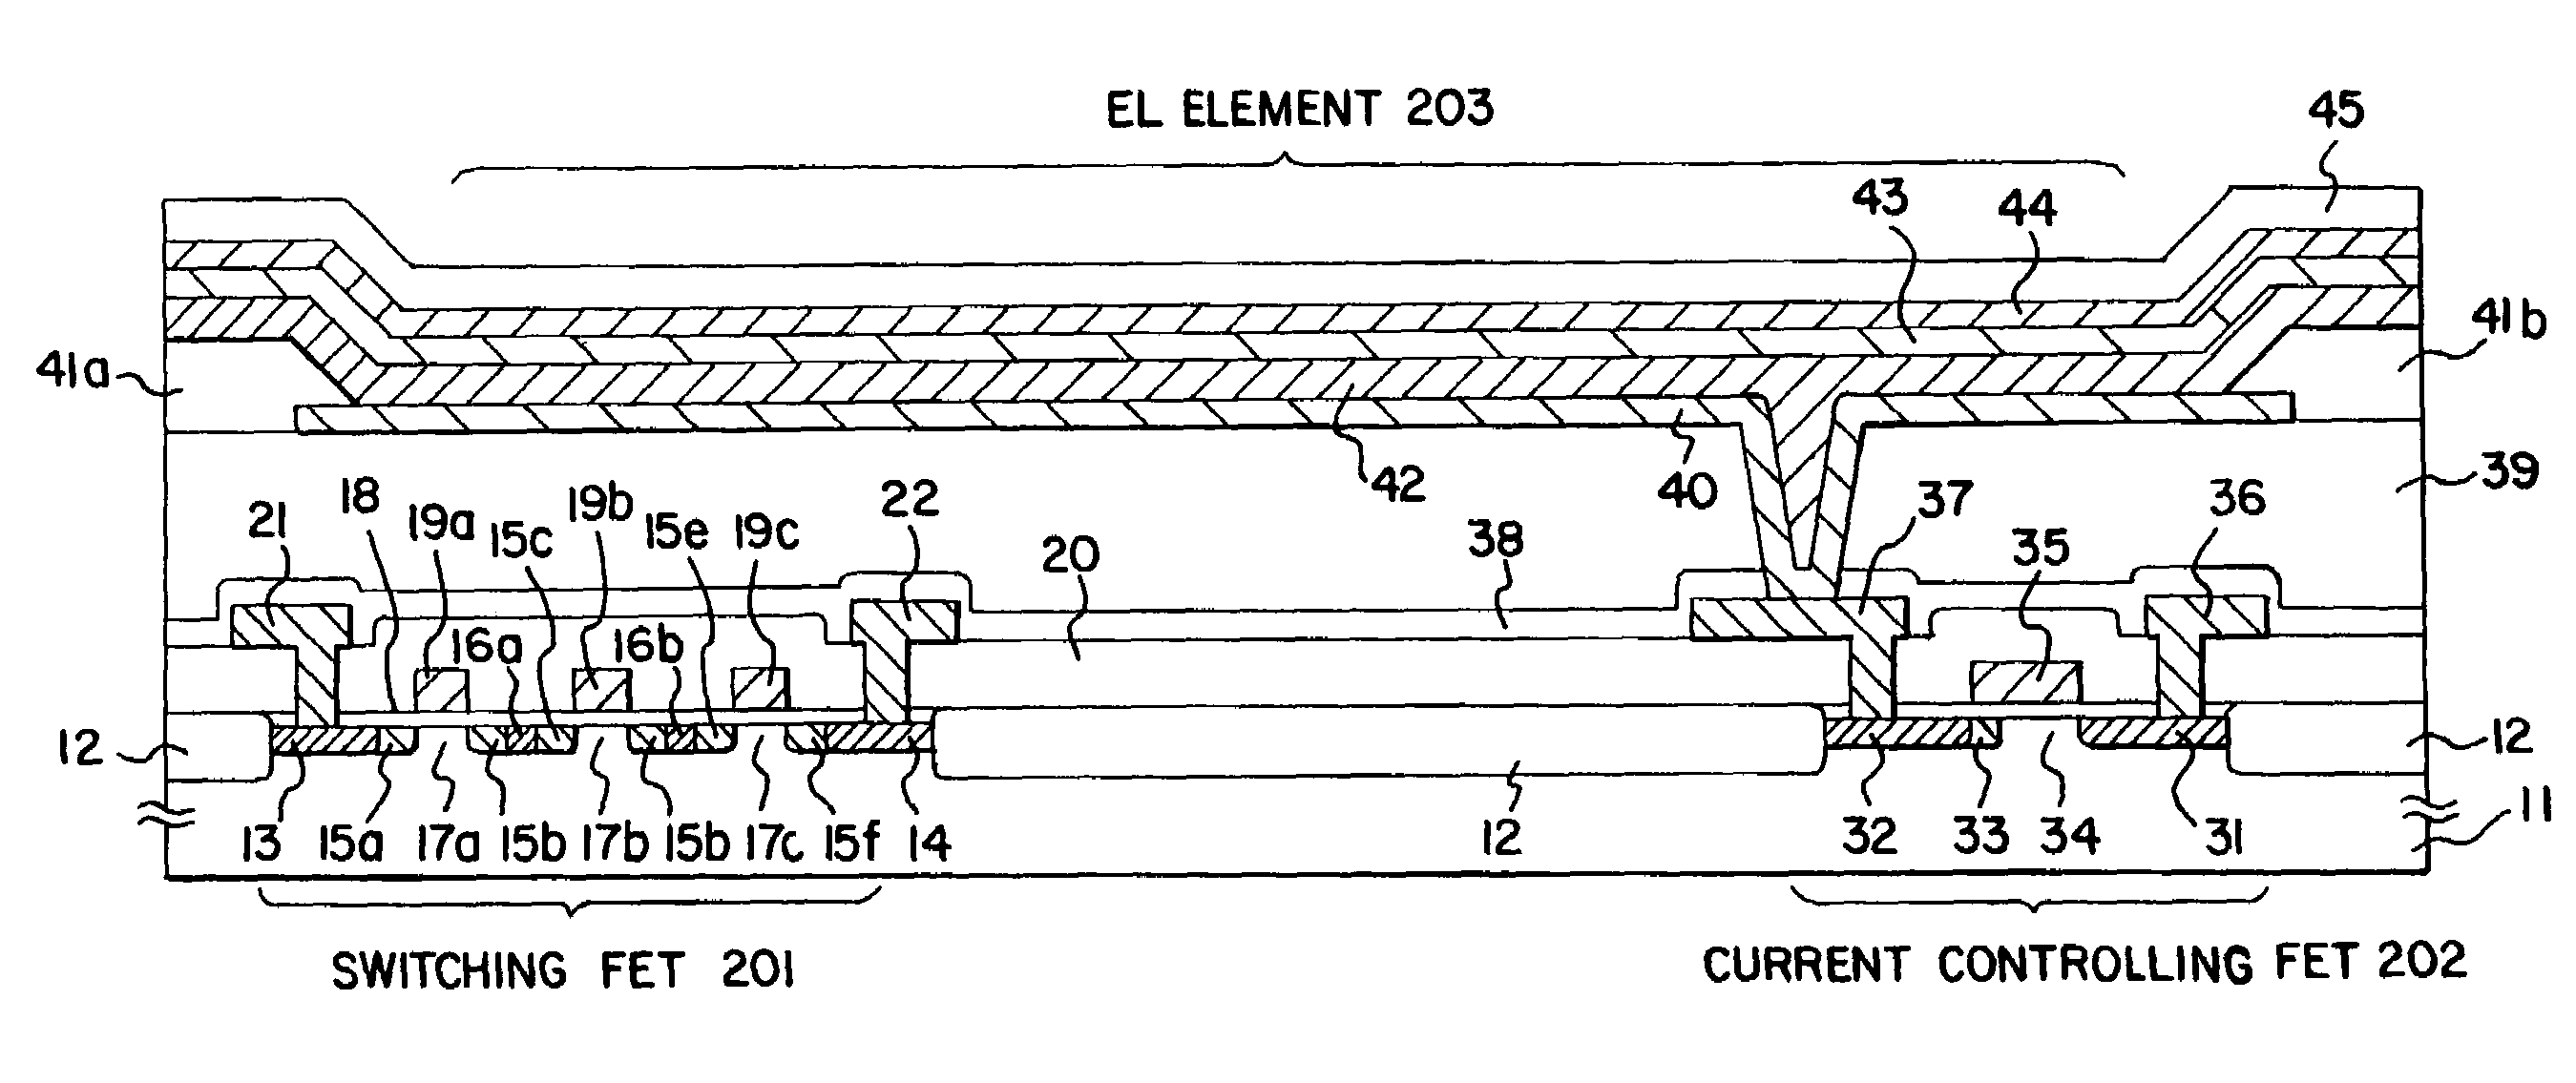 Display device using electroluminescence material